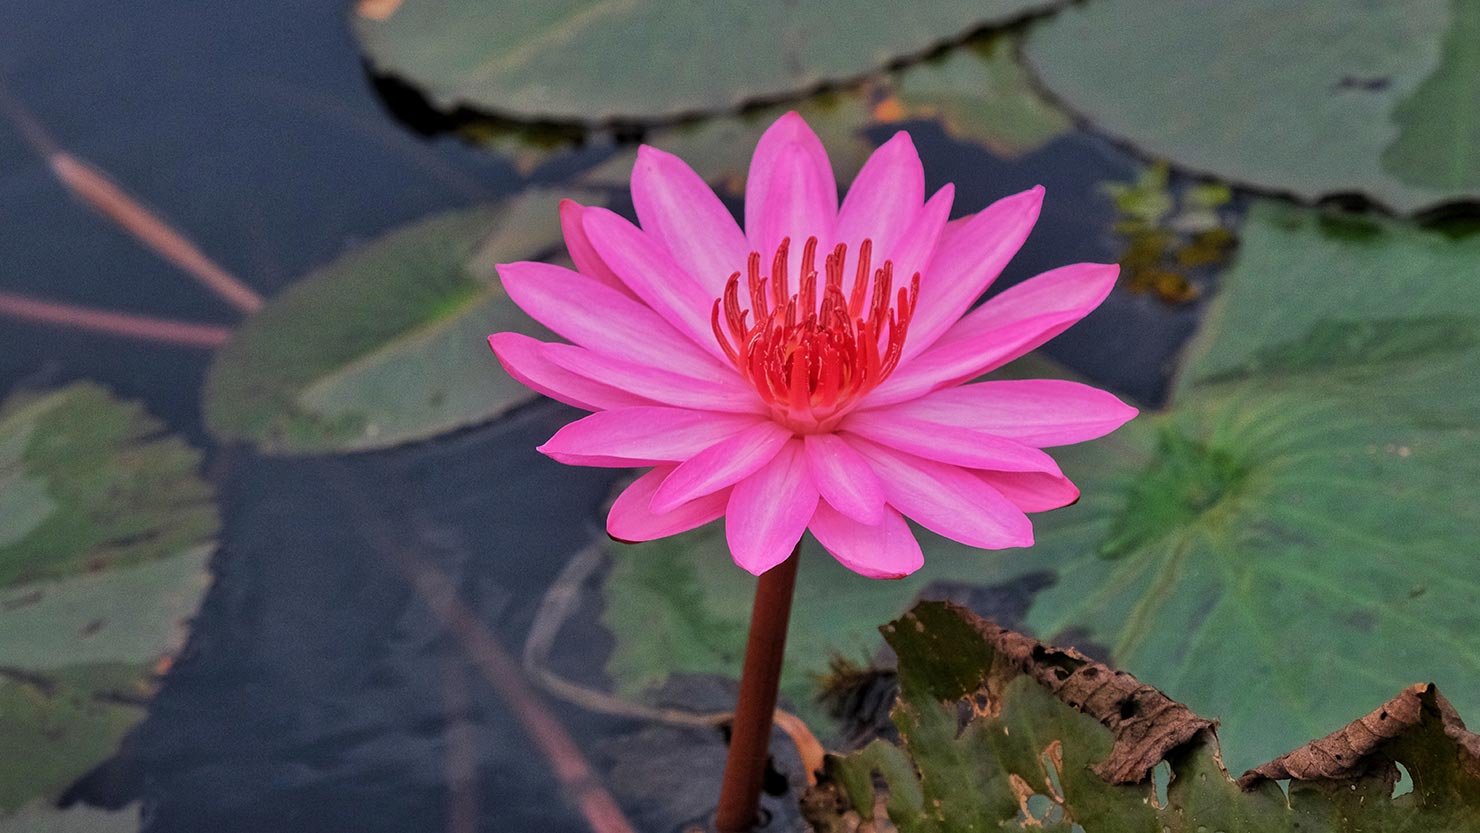 The lilies that bloom across Nong Han Kumphawapi Lake are often referred to as Lotus flowers, but in actuality they are water lilies